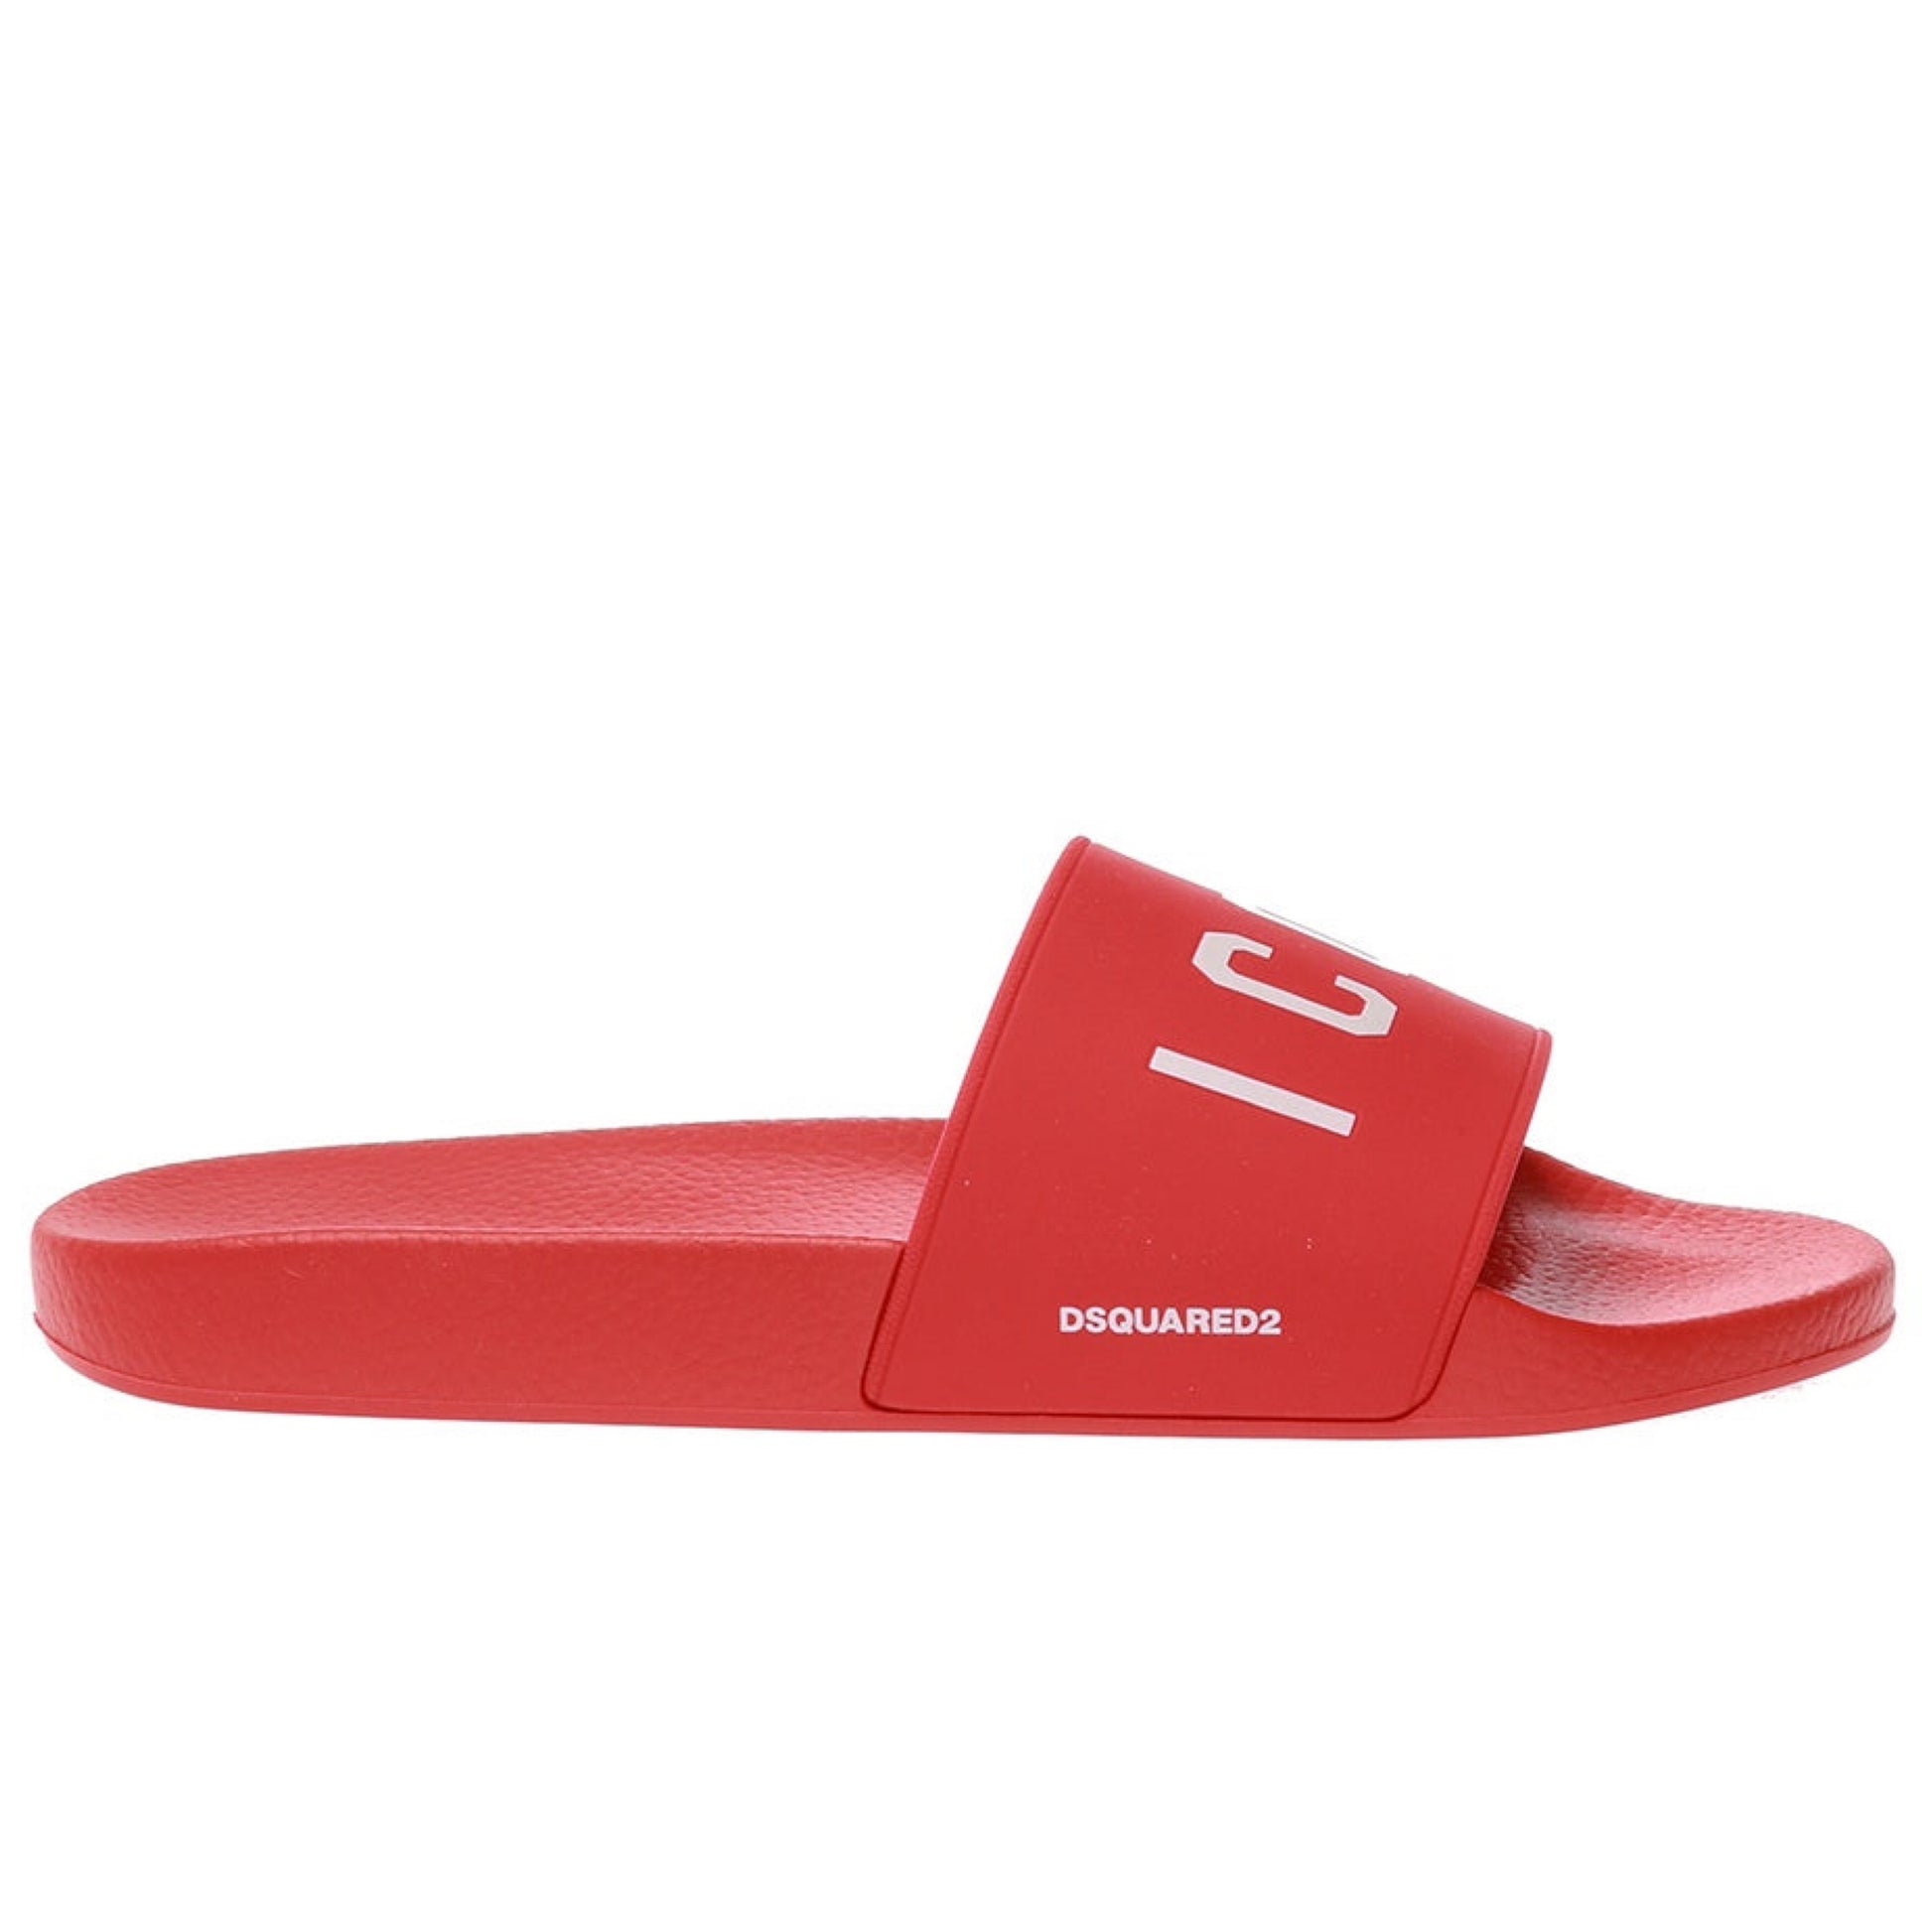 DSQUARED2 Red ICON Sliders - DANYOUNGUK